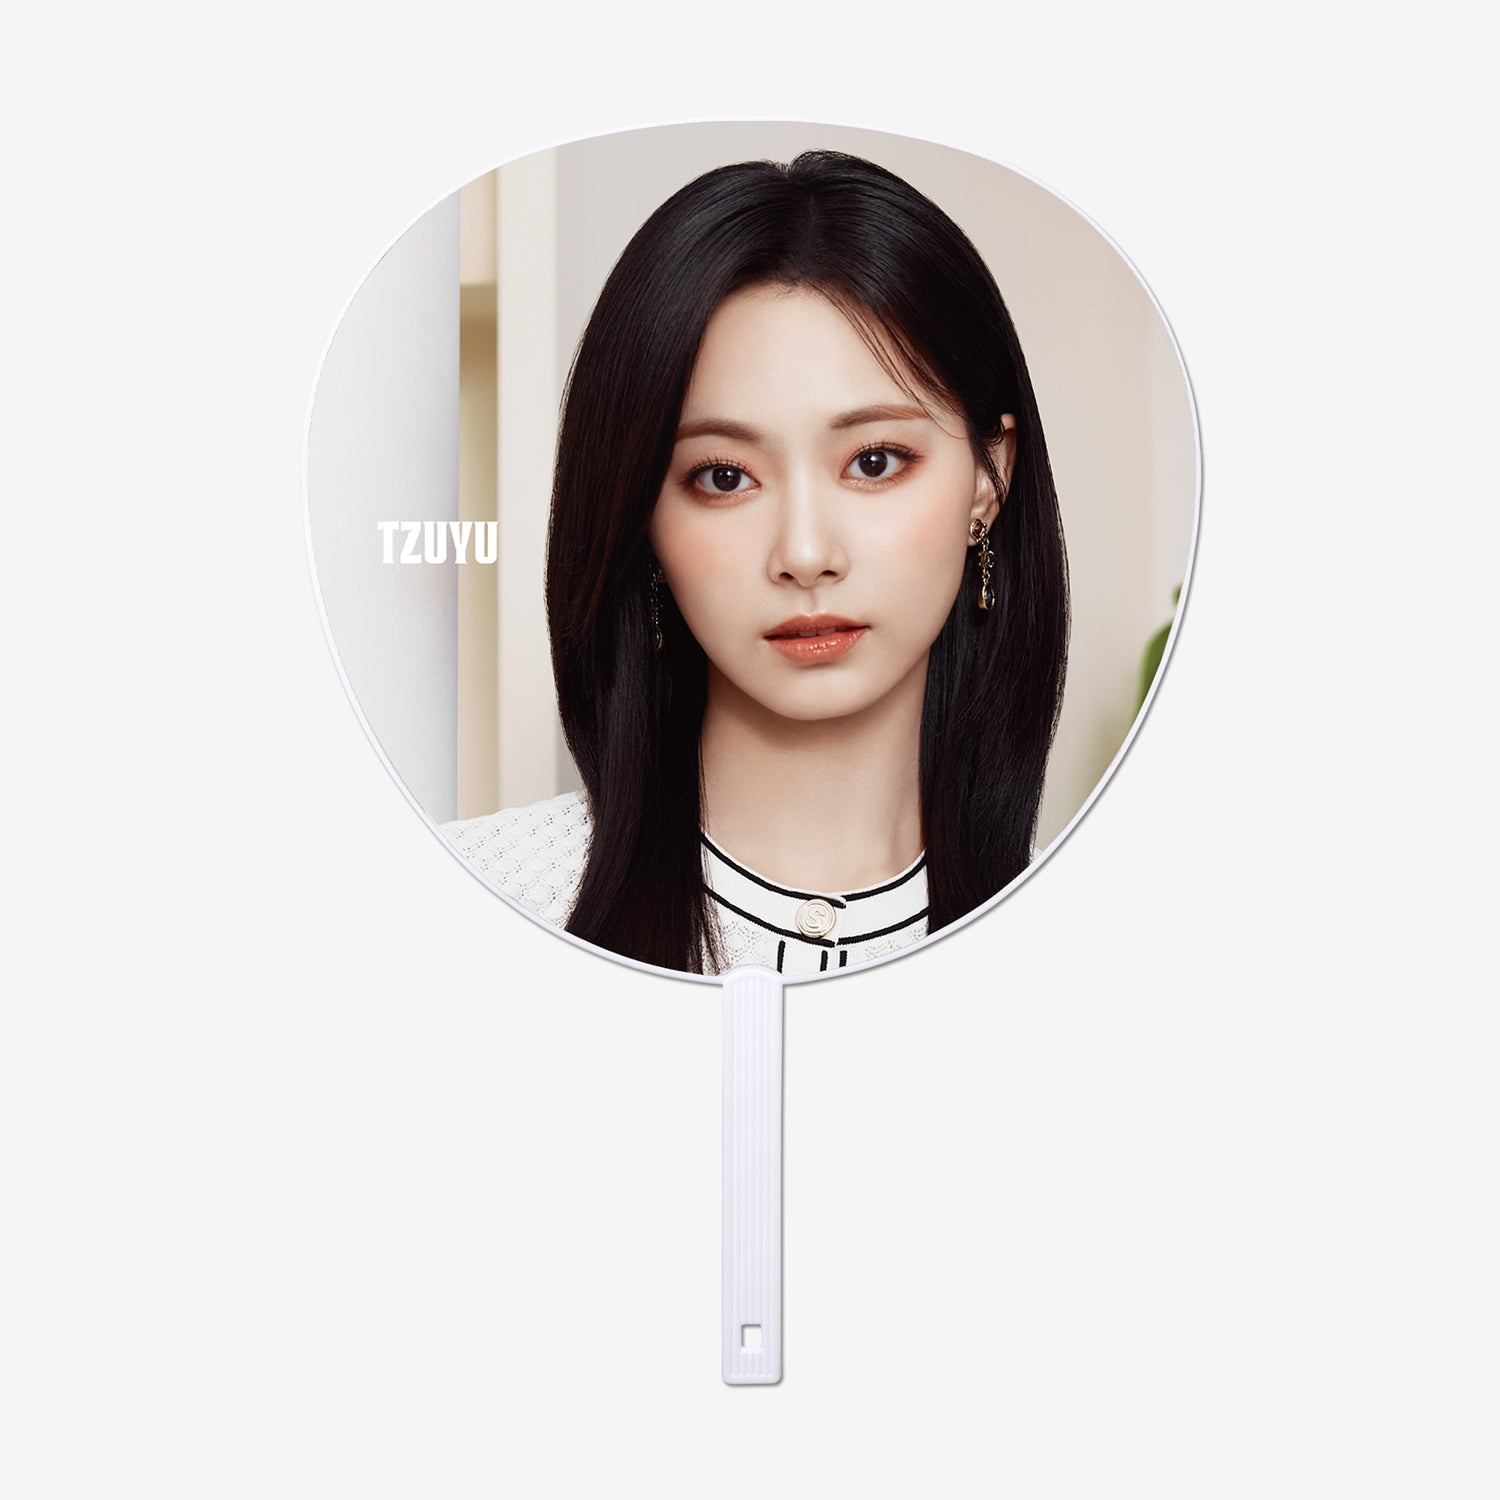 IMAGE PICKET - TZUYU【SPECIAL】/ TWICE『READY TO BE SPECIAL』